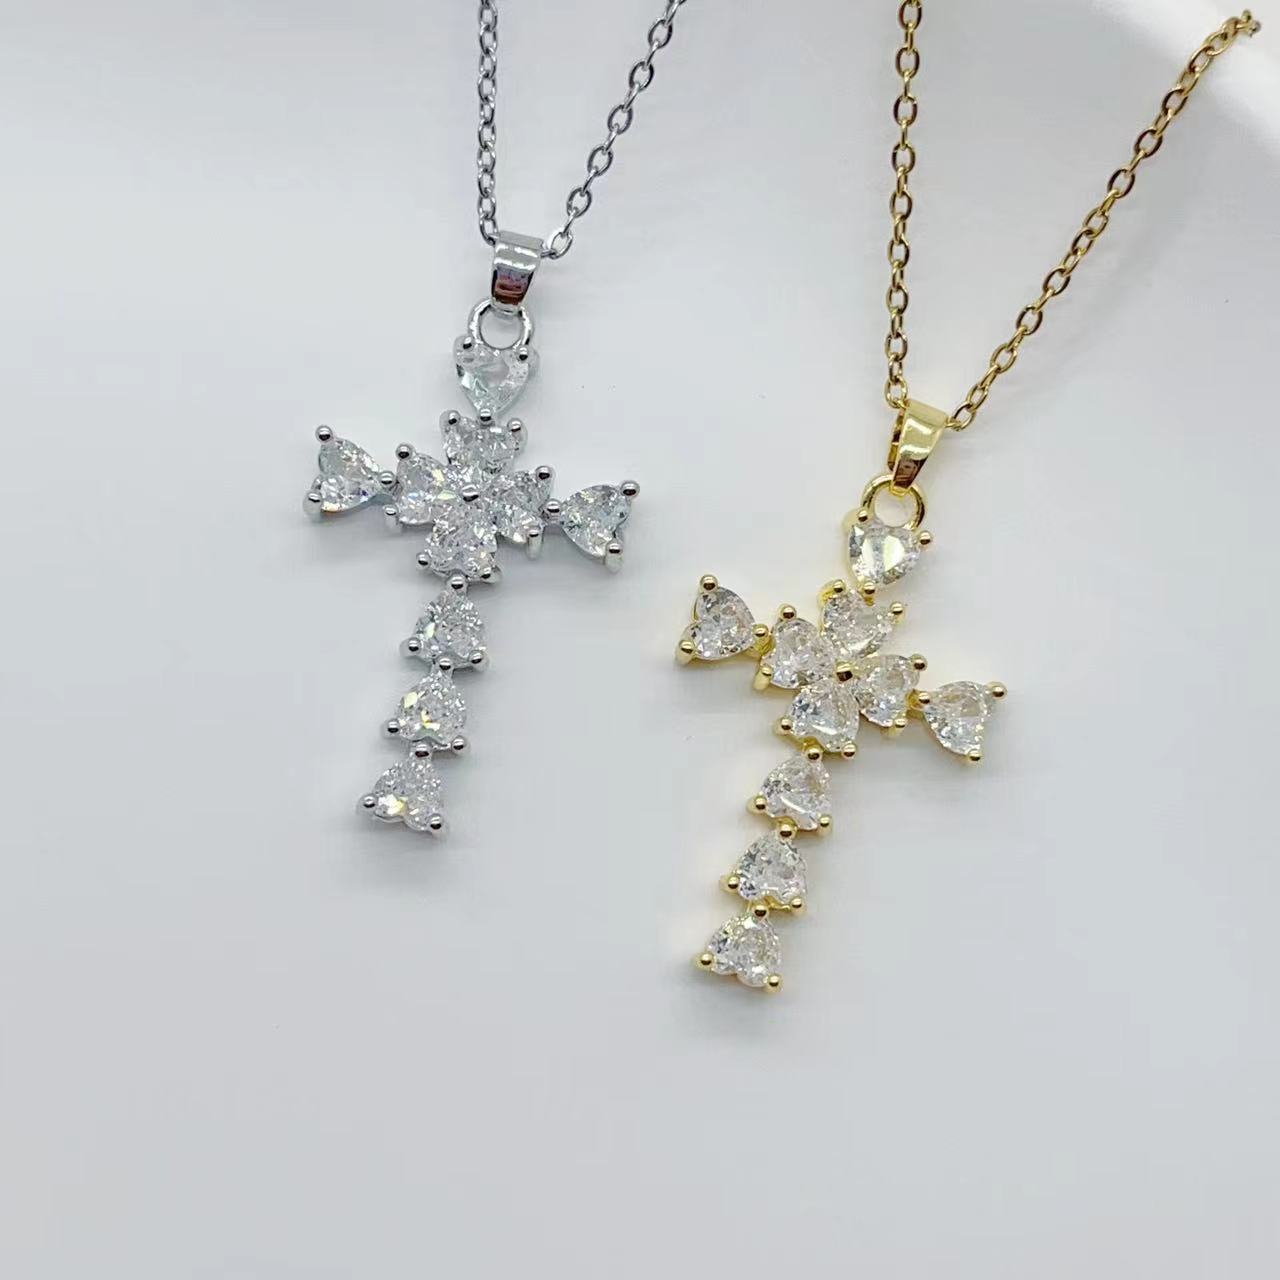 Europe and America Cross Border New Product Best-Selling Copper Zircon Cross Necklace Creative Fashion Fashionmonger All-Match Necklace Accessories